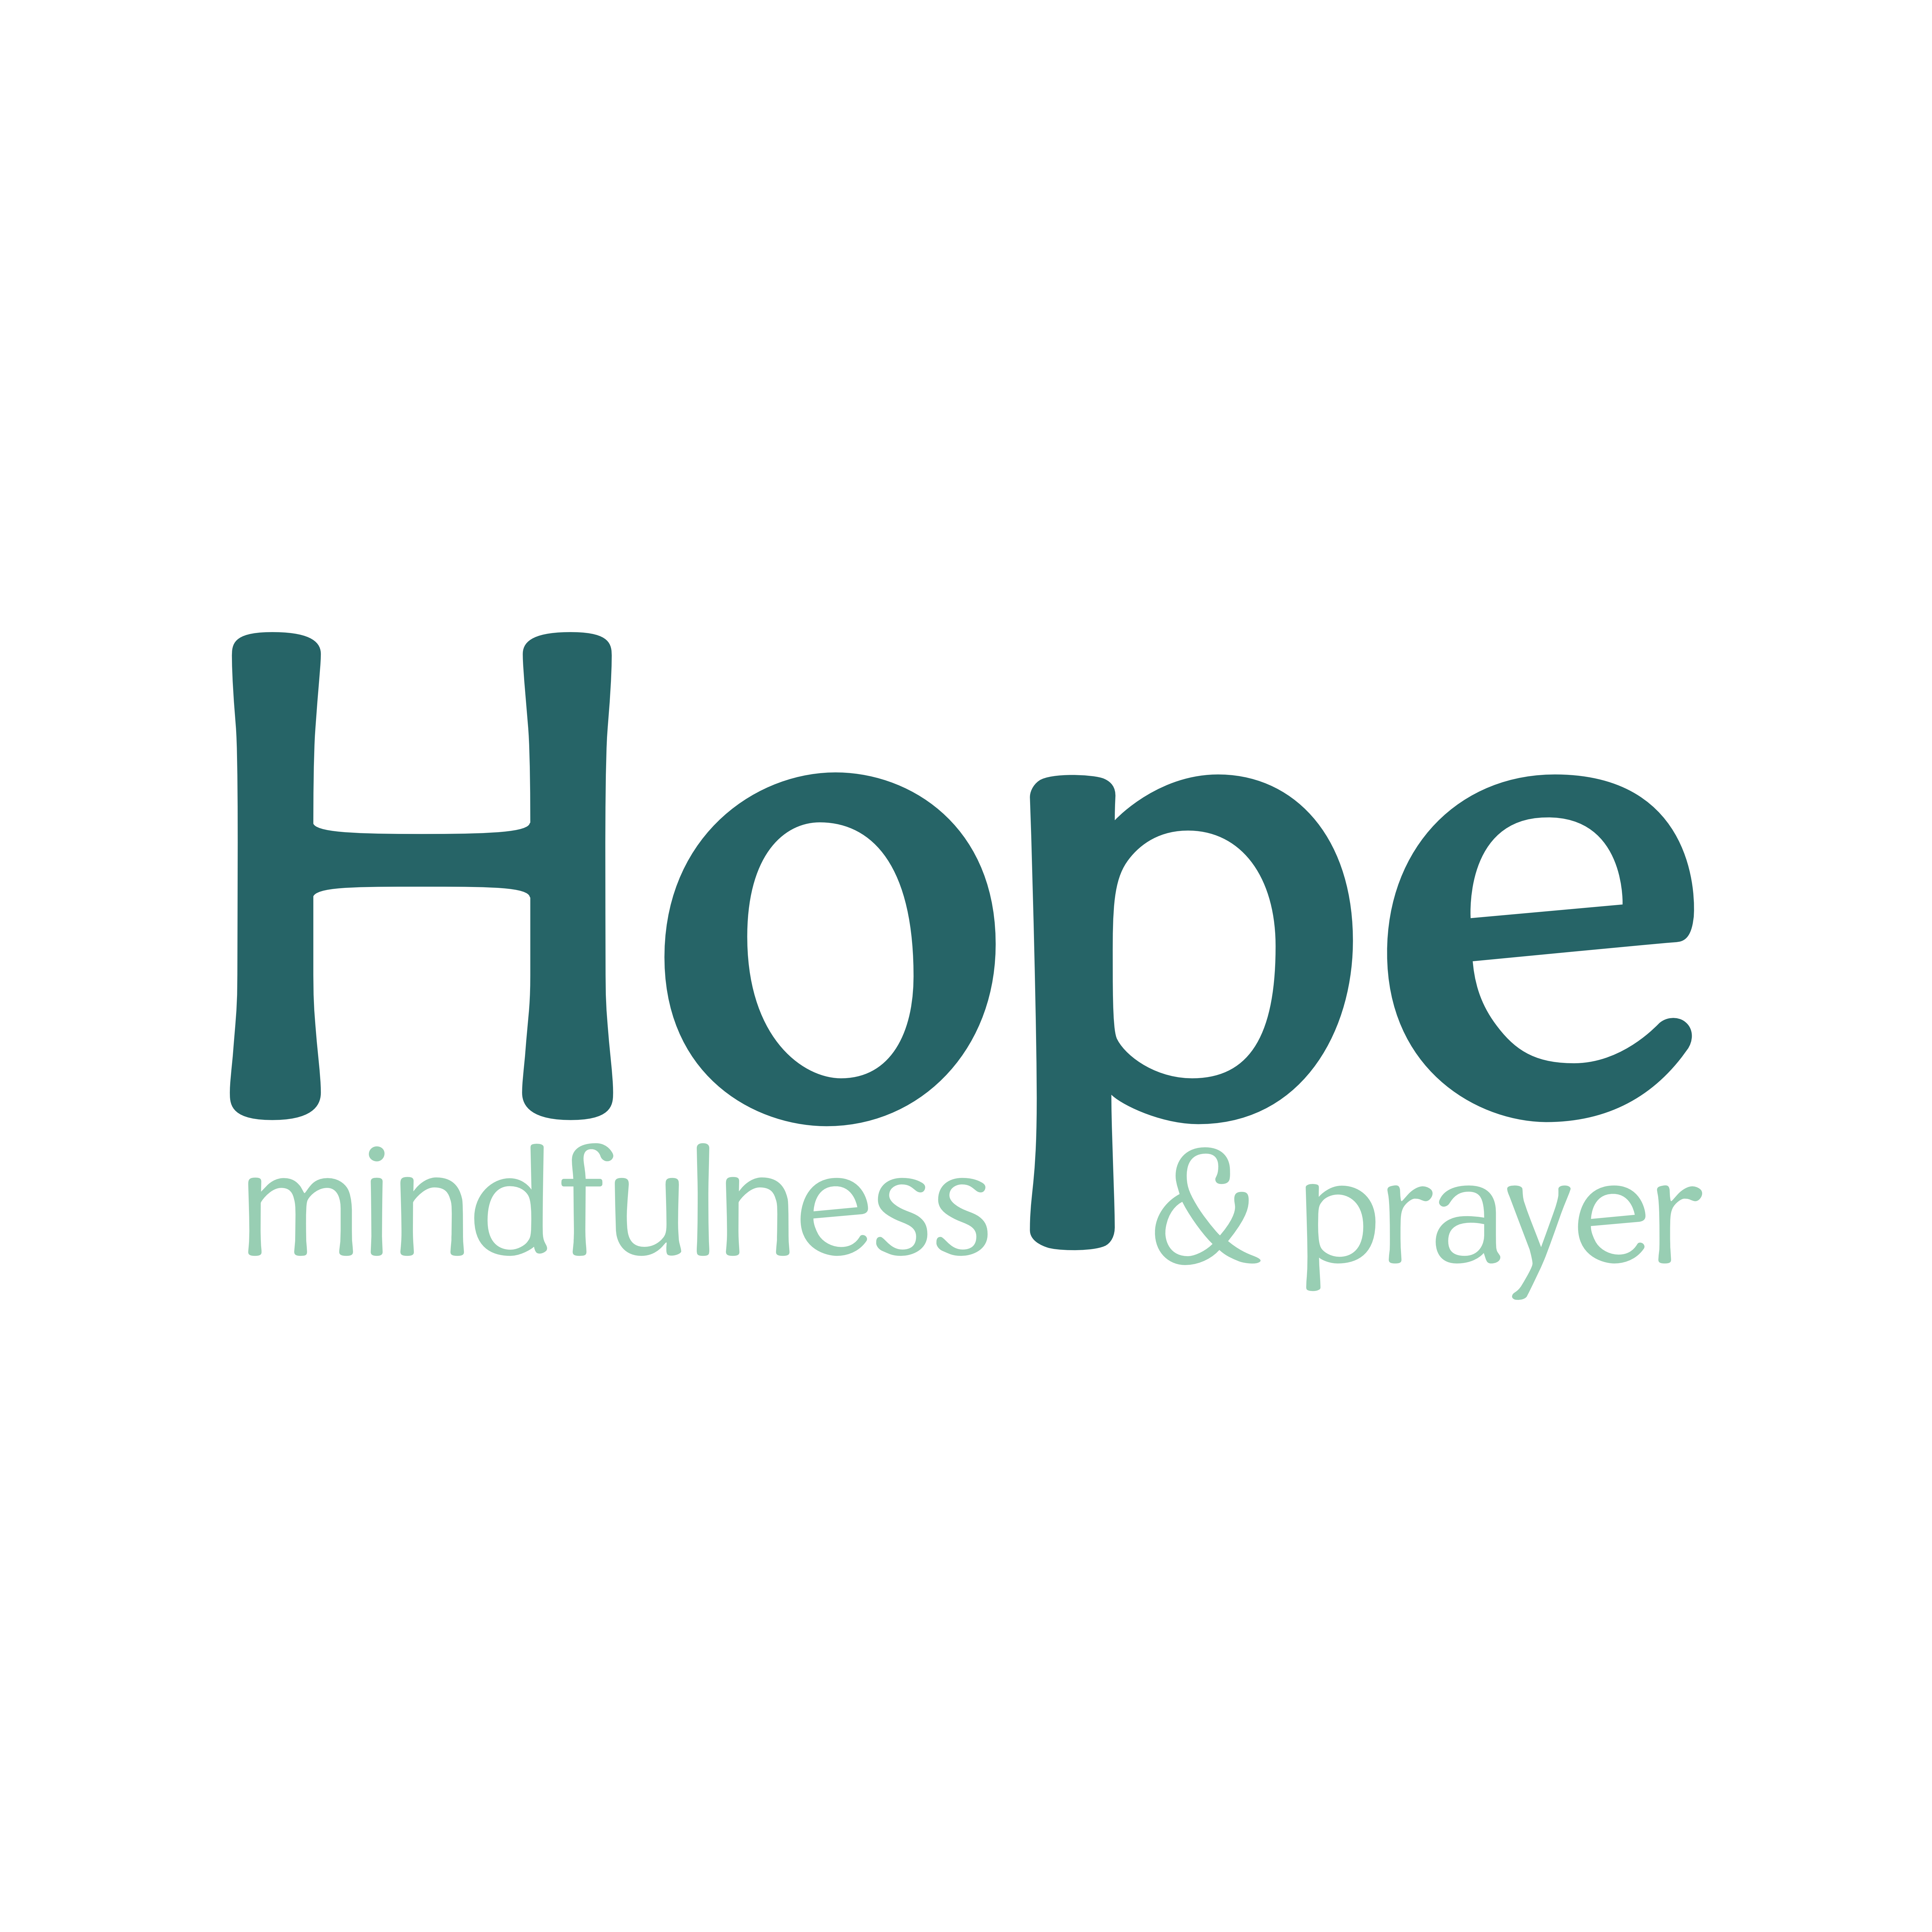 How to Delete Your Hope Mindfulness Account